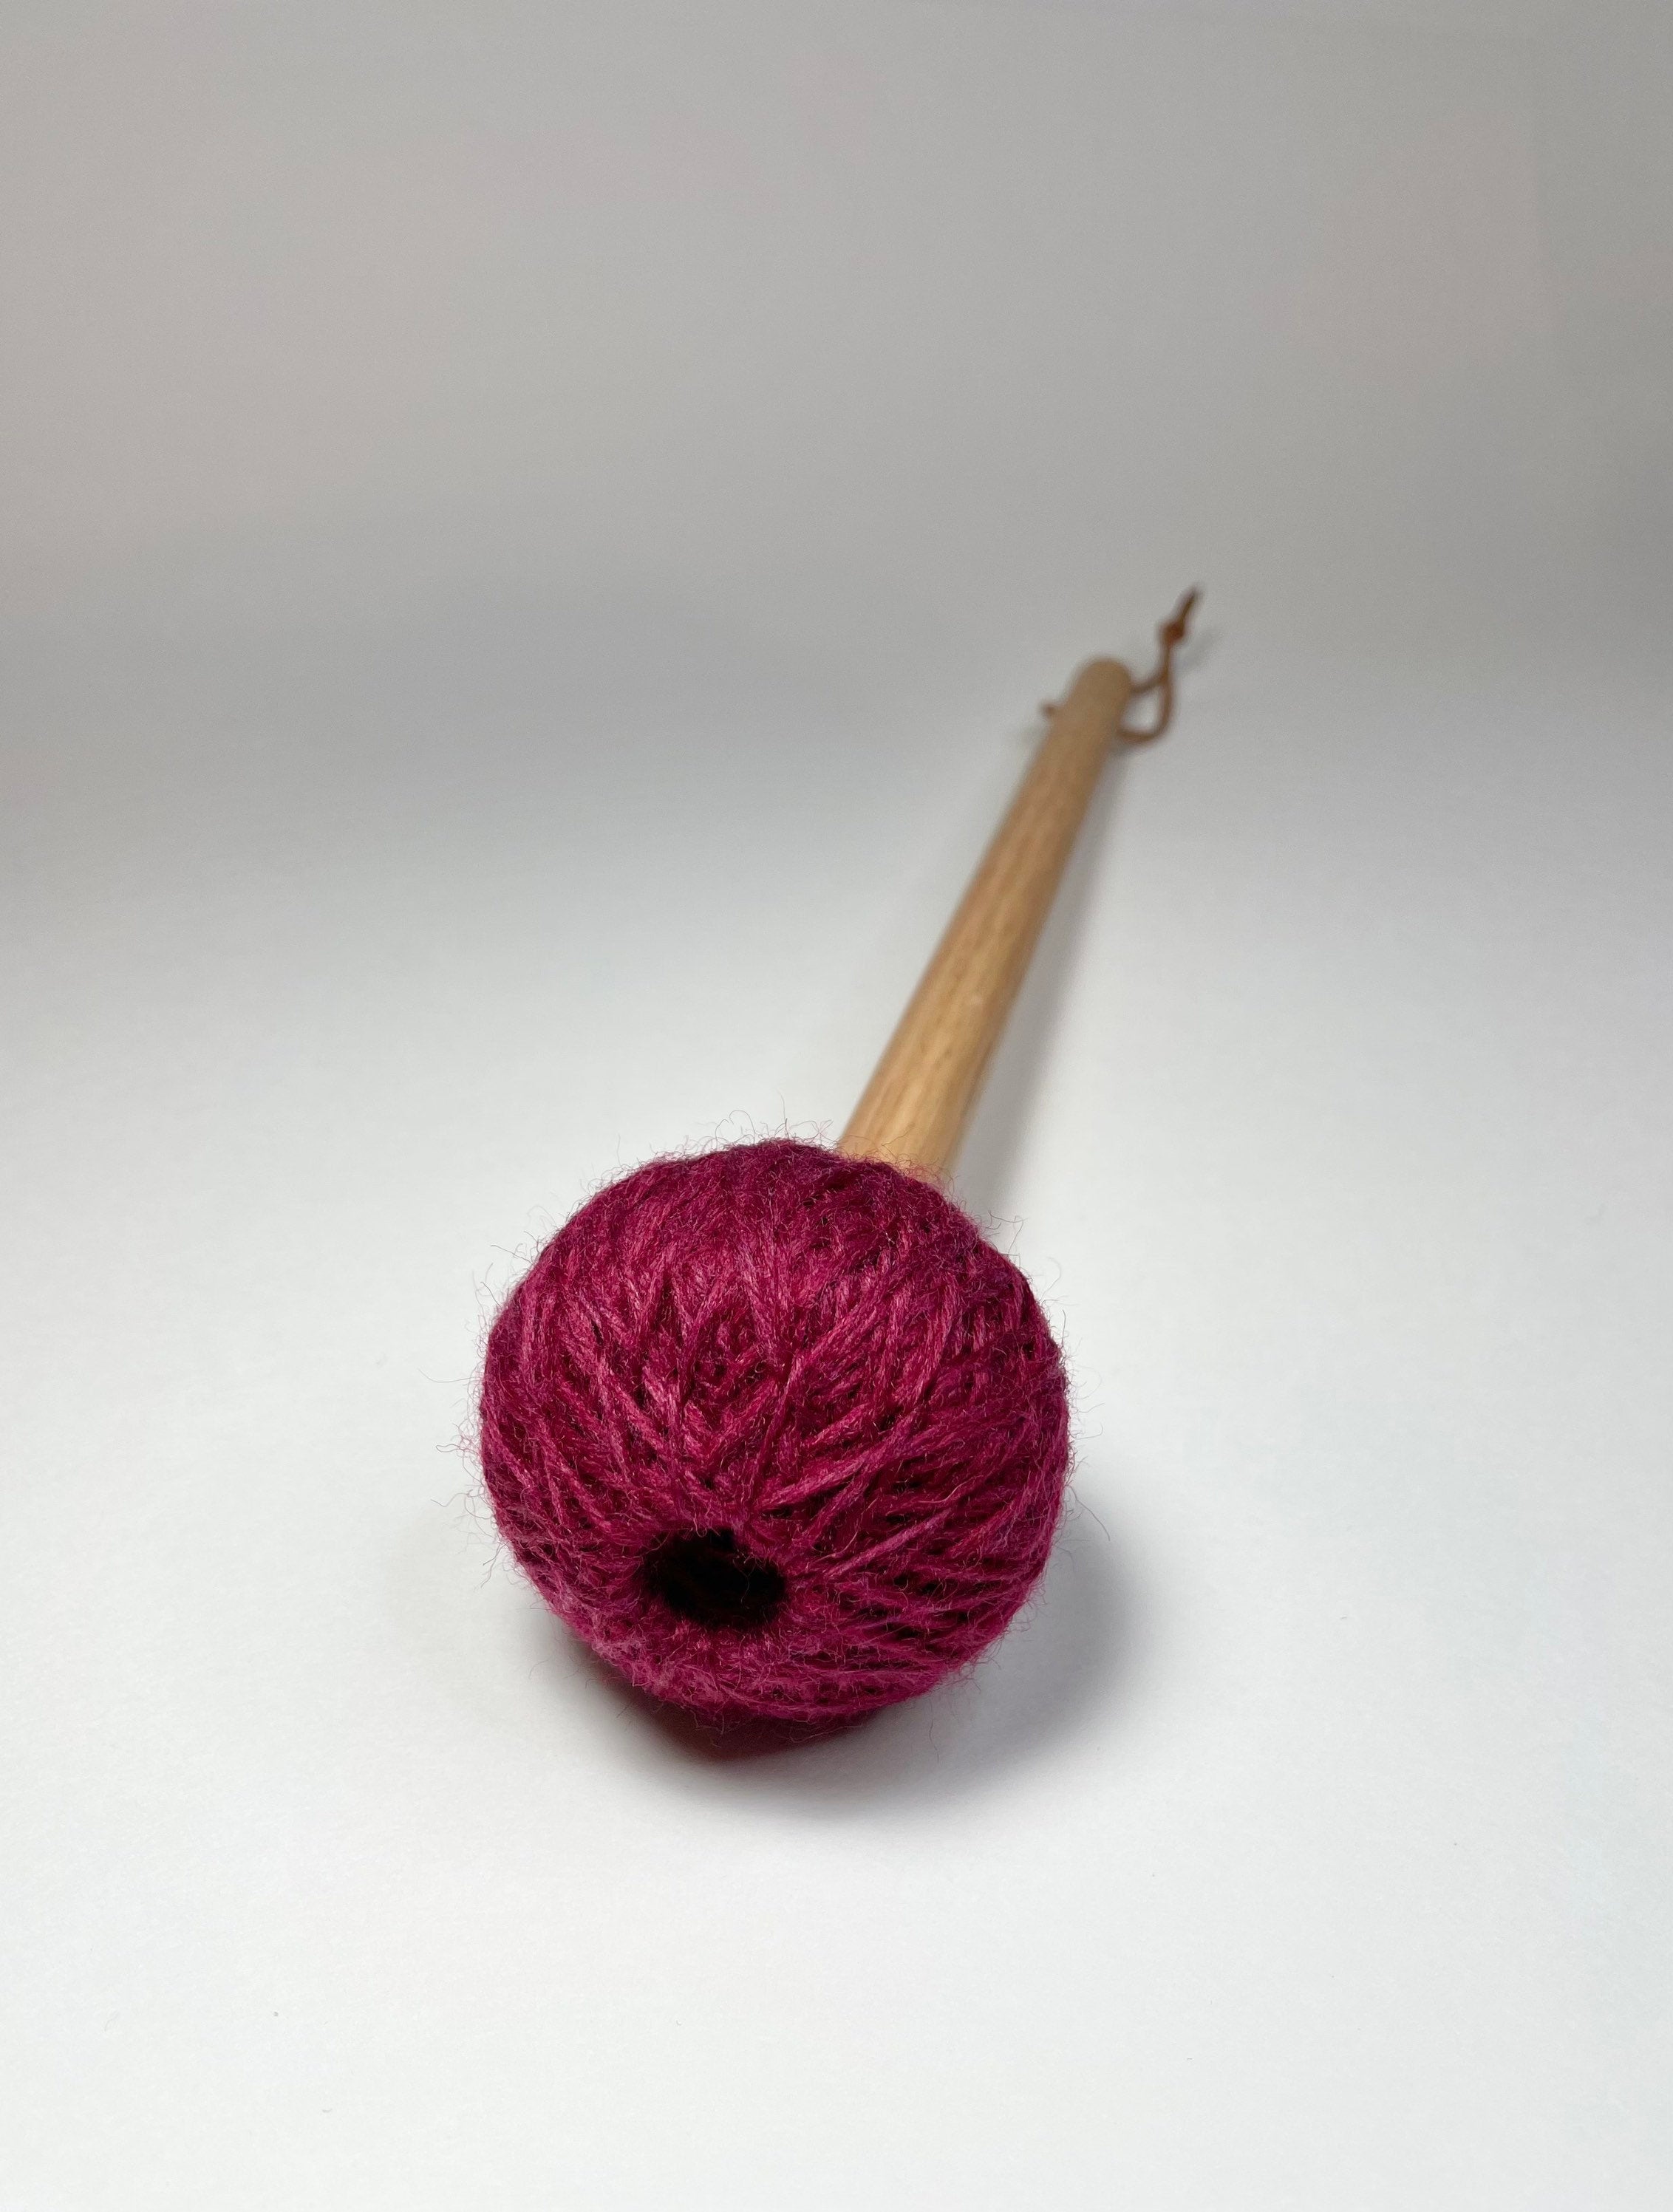 Mallet Friction Rod for Singing Bowls With Leather Cover Leather Mallet 3  Cm in Diameter 